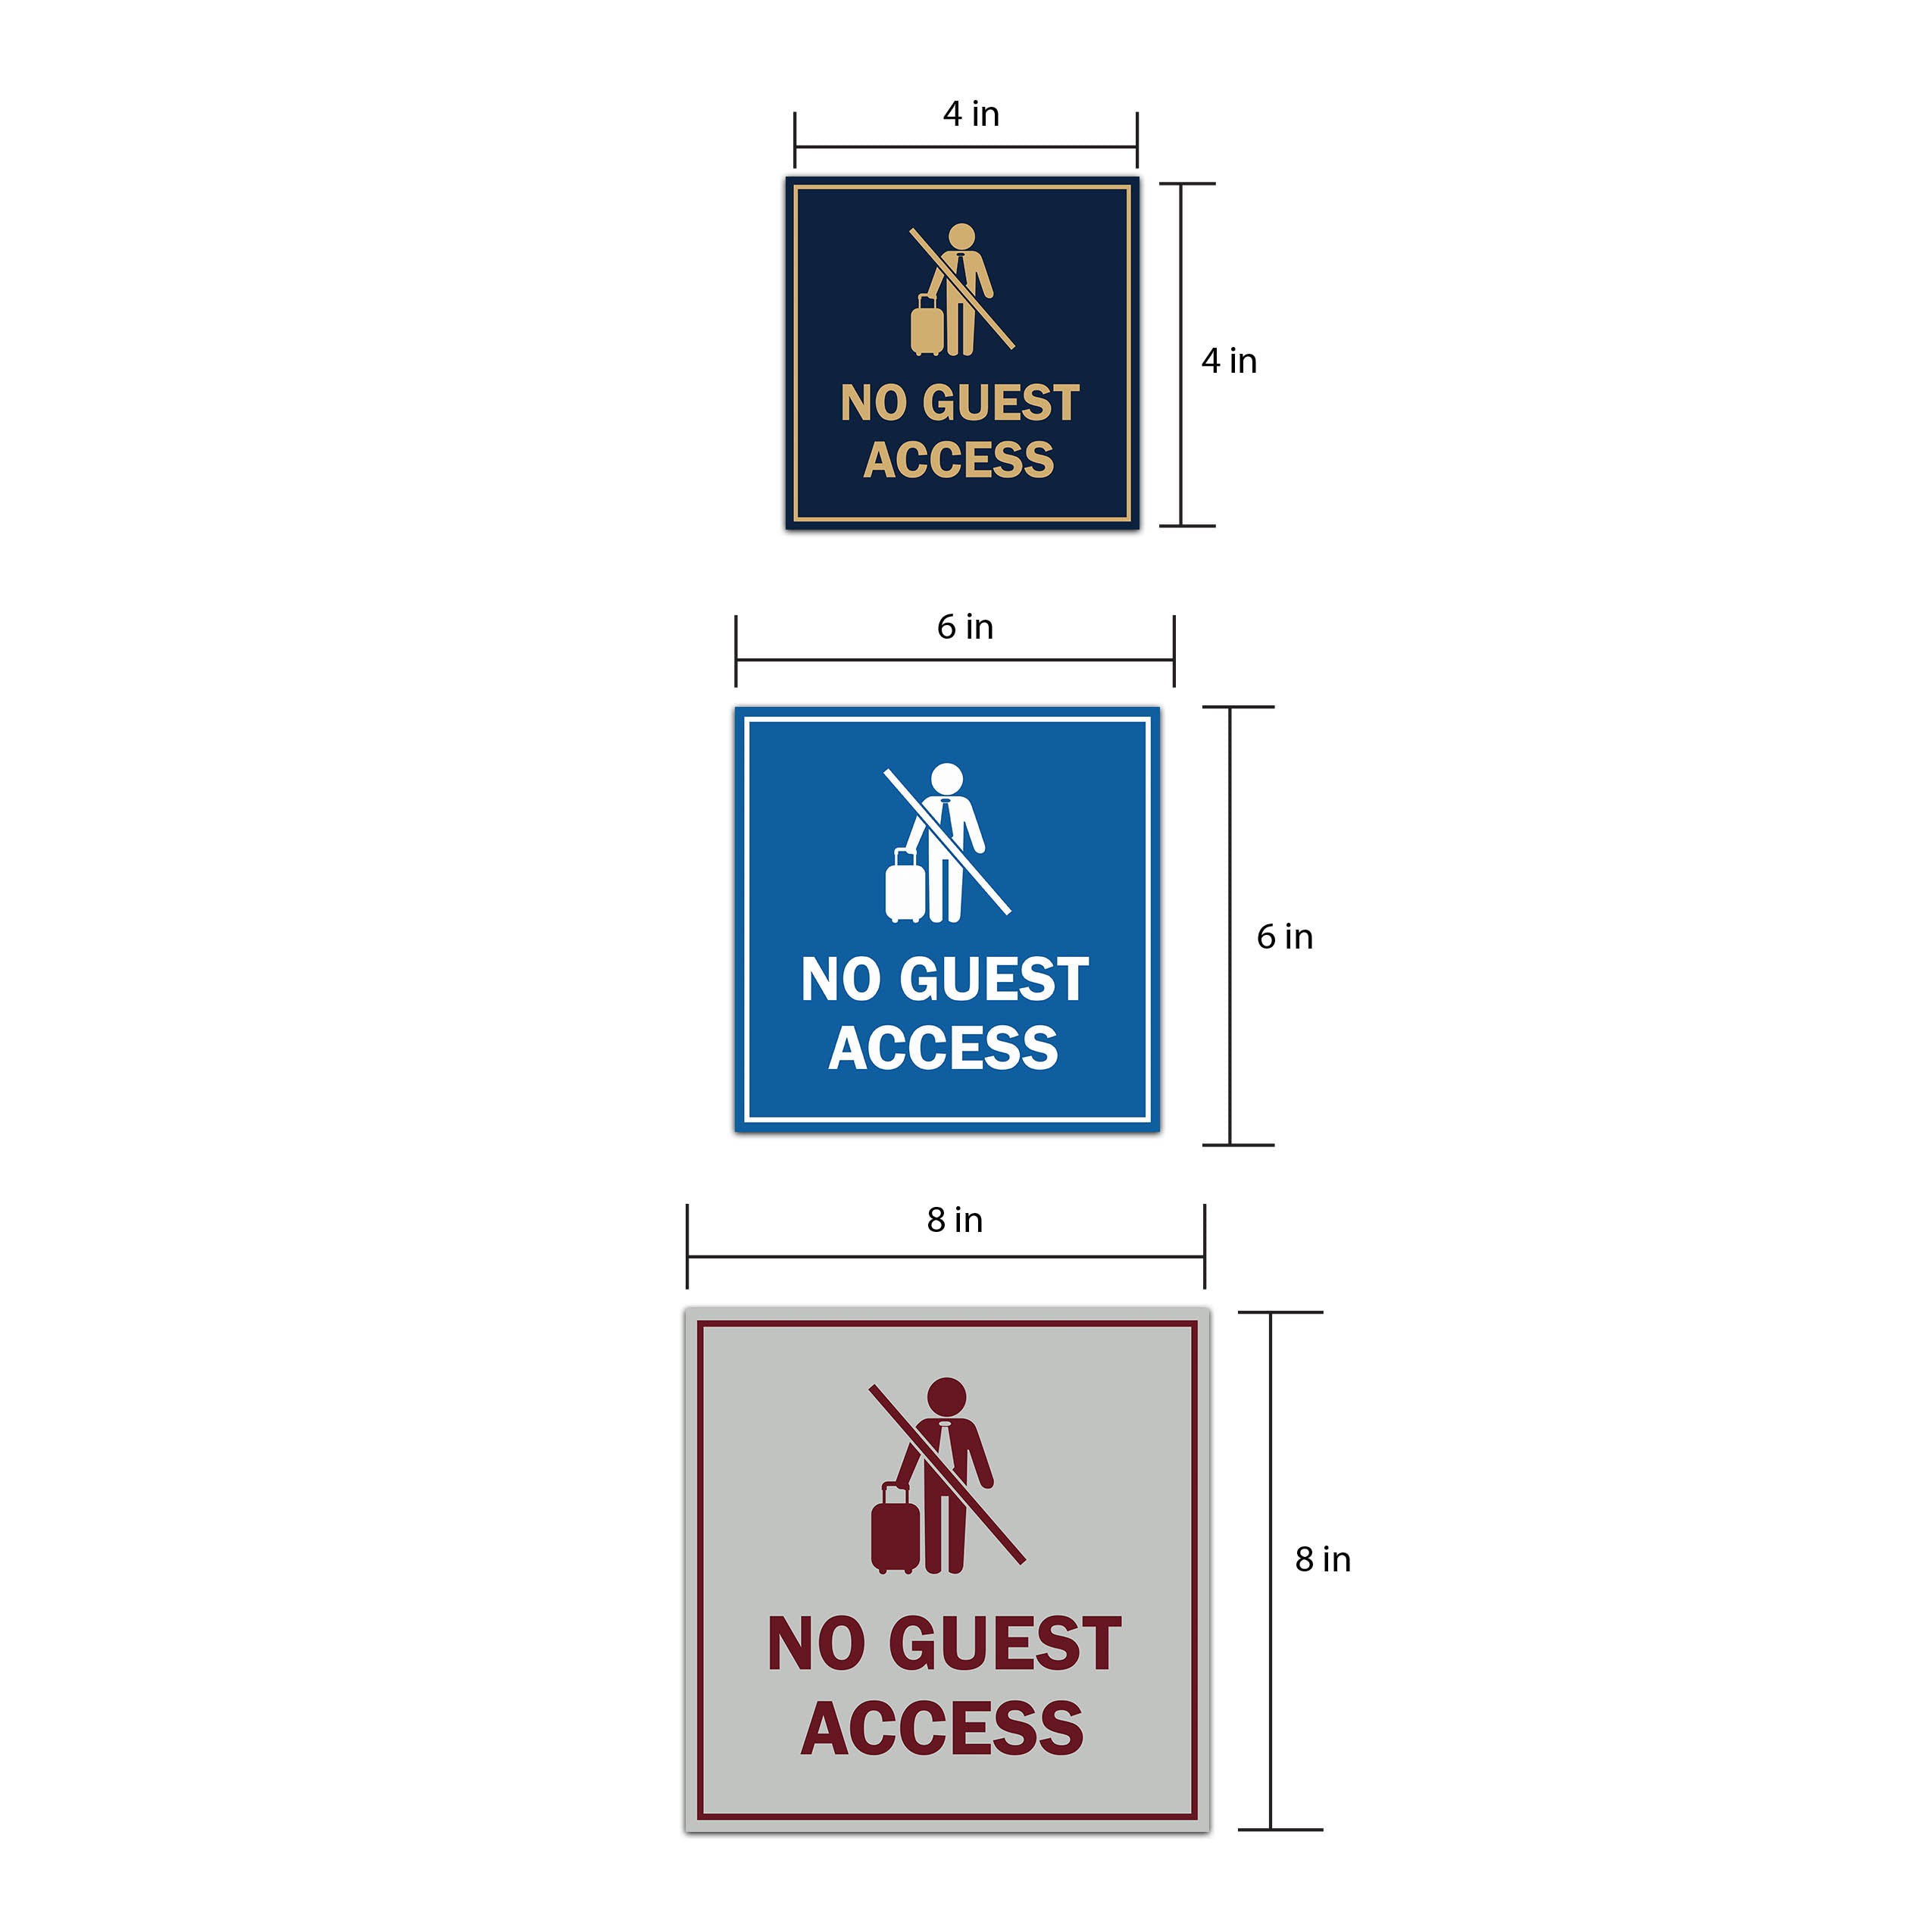 Signs ByLITA Square No Guest Access (Stick Man) Wall or Door Sign